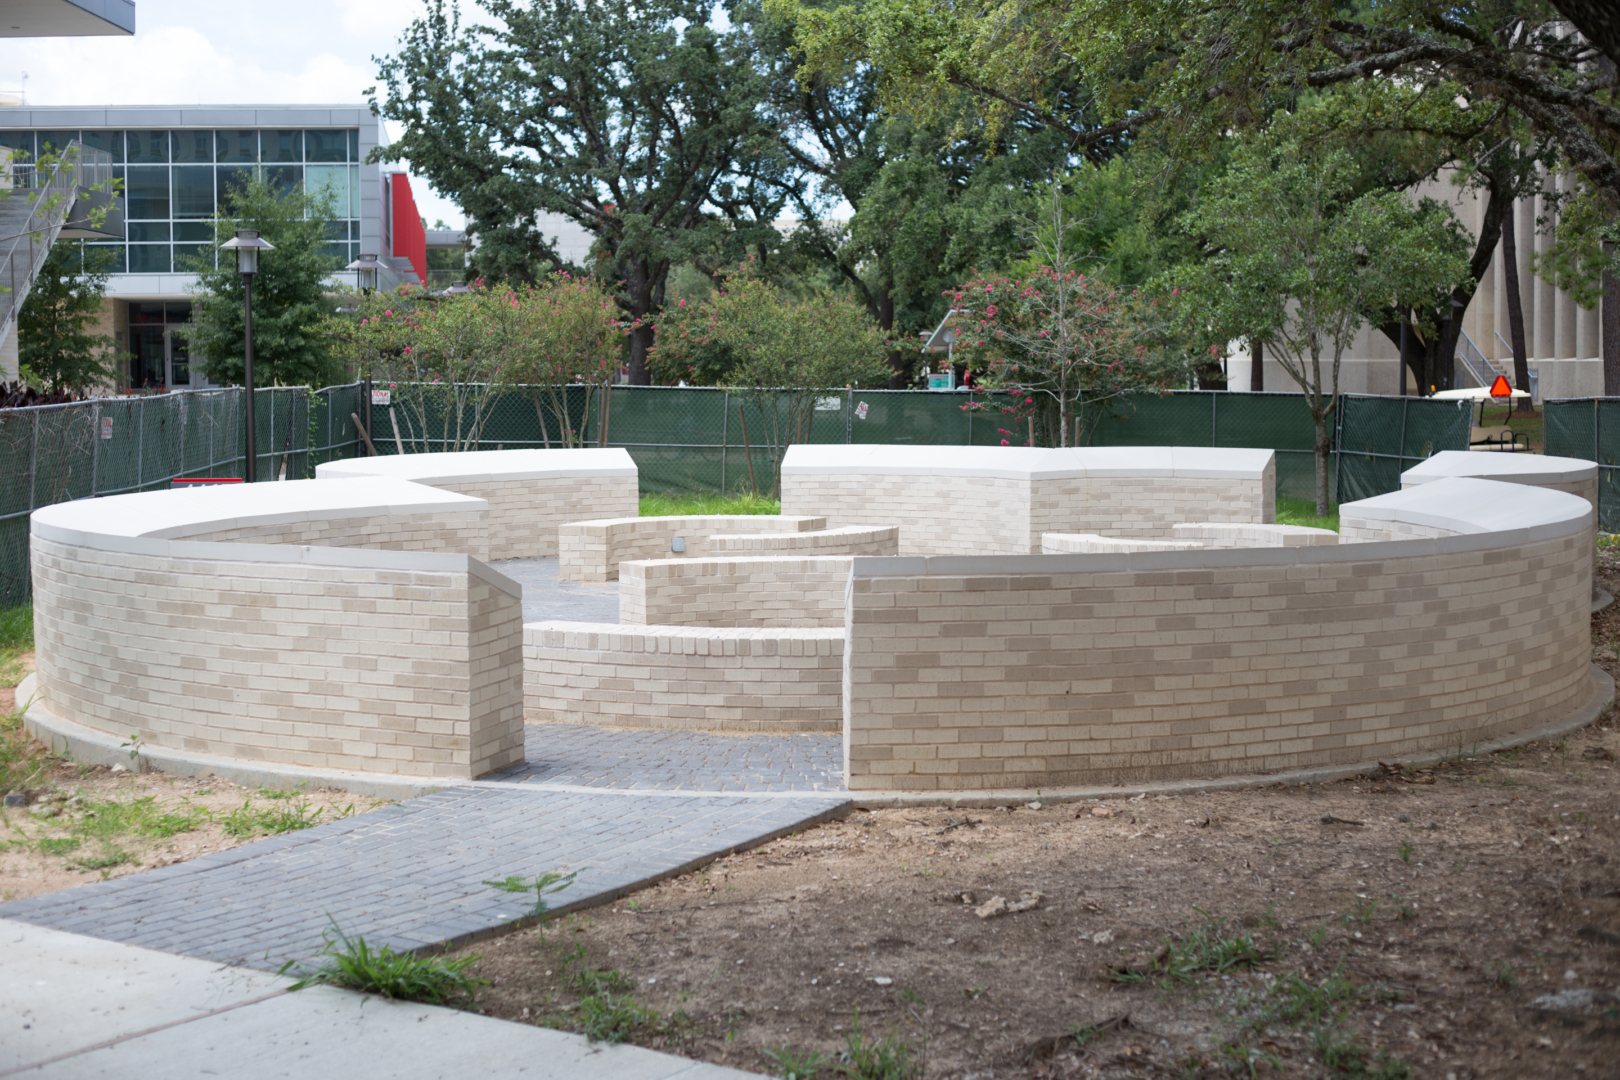 The Greek Unity Garden is being built to represent cultural fraternities and sororities on campus. | Trevor Nolley/The Cougar